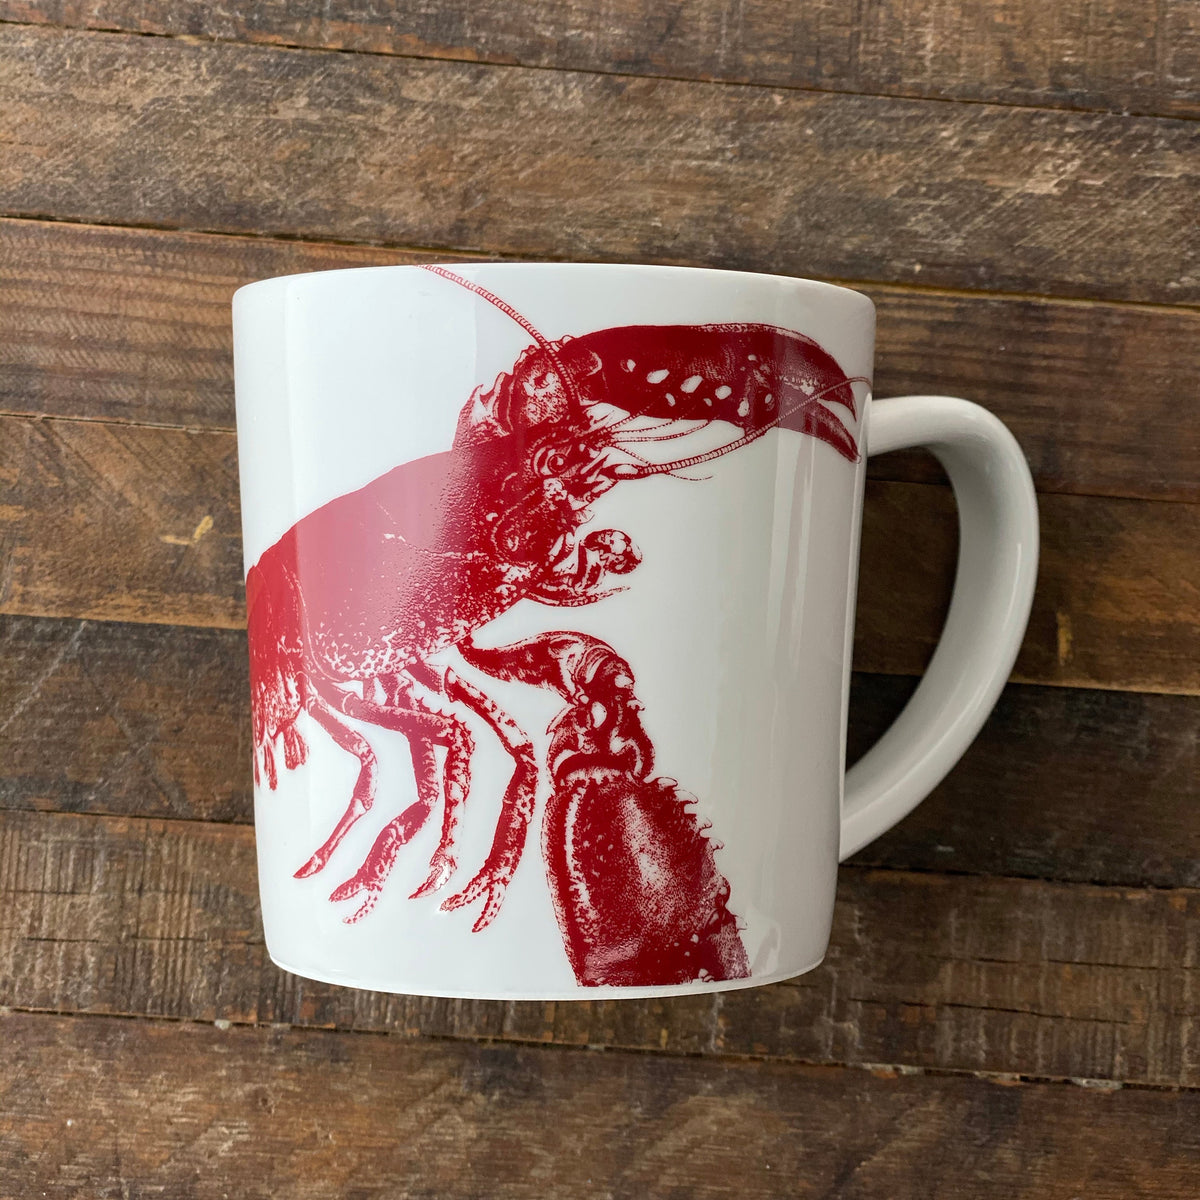 A Lobster Mug Red by Caskata Artisanal Home with a red lobster design.